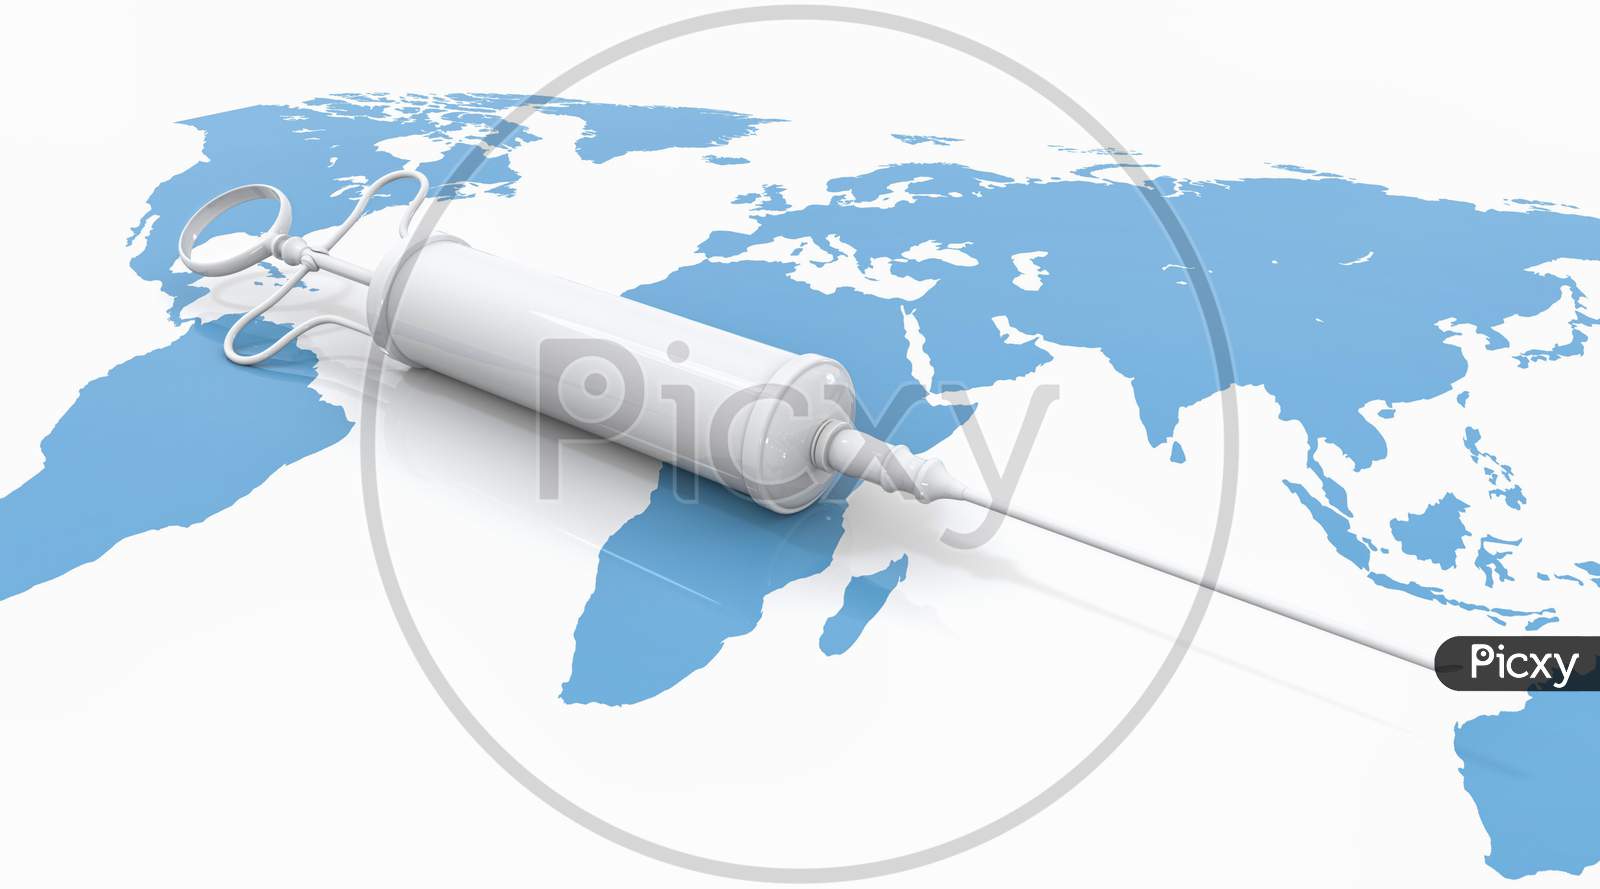 White Vaccine Syringe On Blue Worldwide International Map As Human Skin Background. Medical And Health Concept. Virus Immunity Vaccine Delivery And Distribution Concept. 3D Illustration